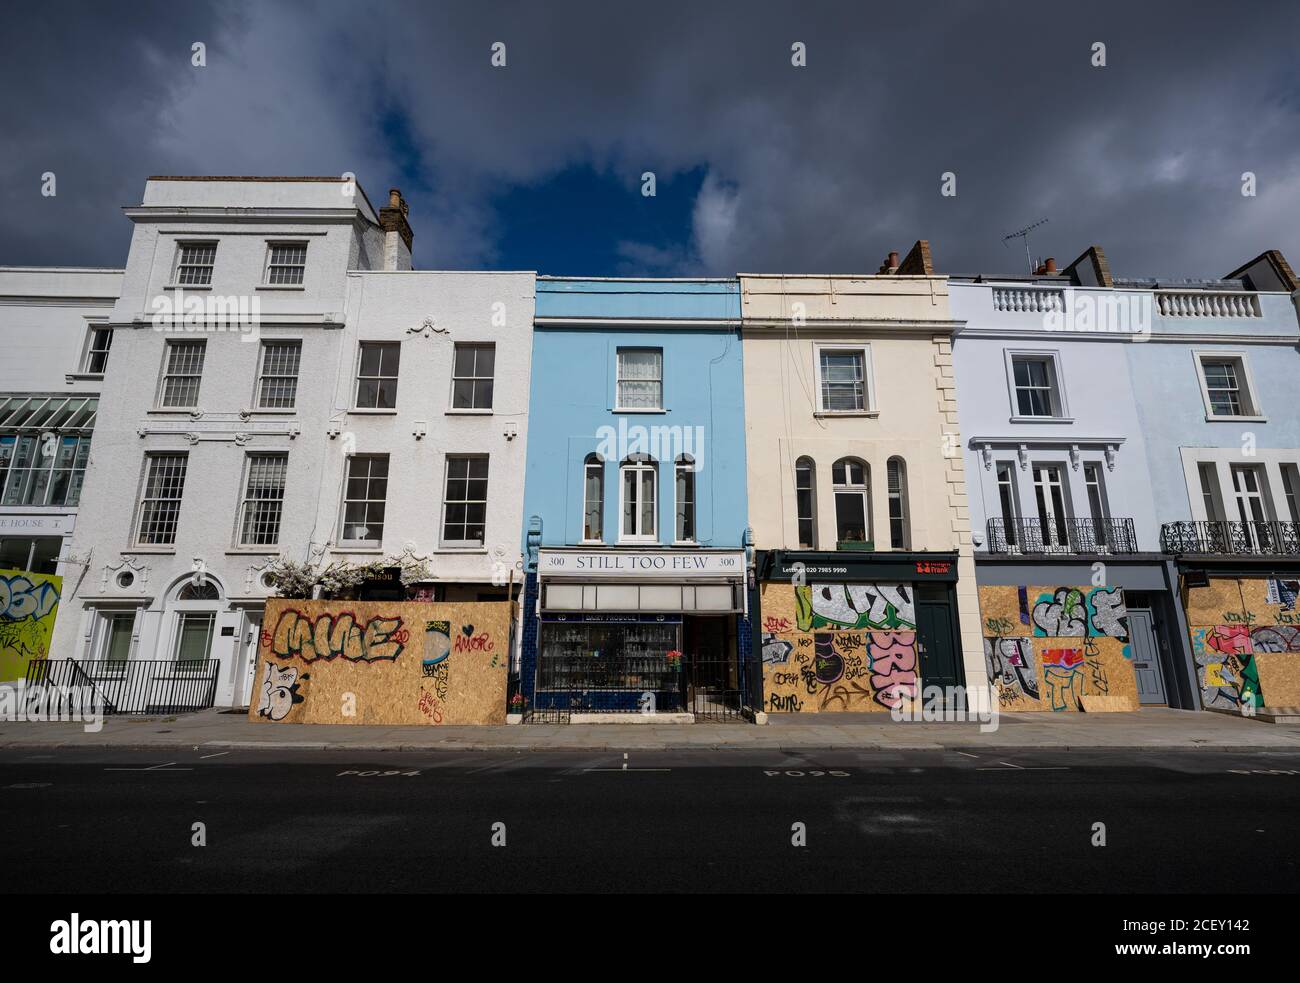 Notting Hill Carnival 2020. Boarding-up ahead of the Million People March in Notting Hill amid fears of public disorder over the bank holiday weekend. Stock Photo